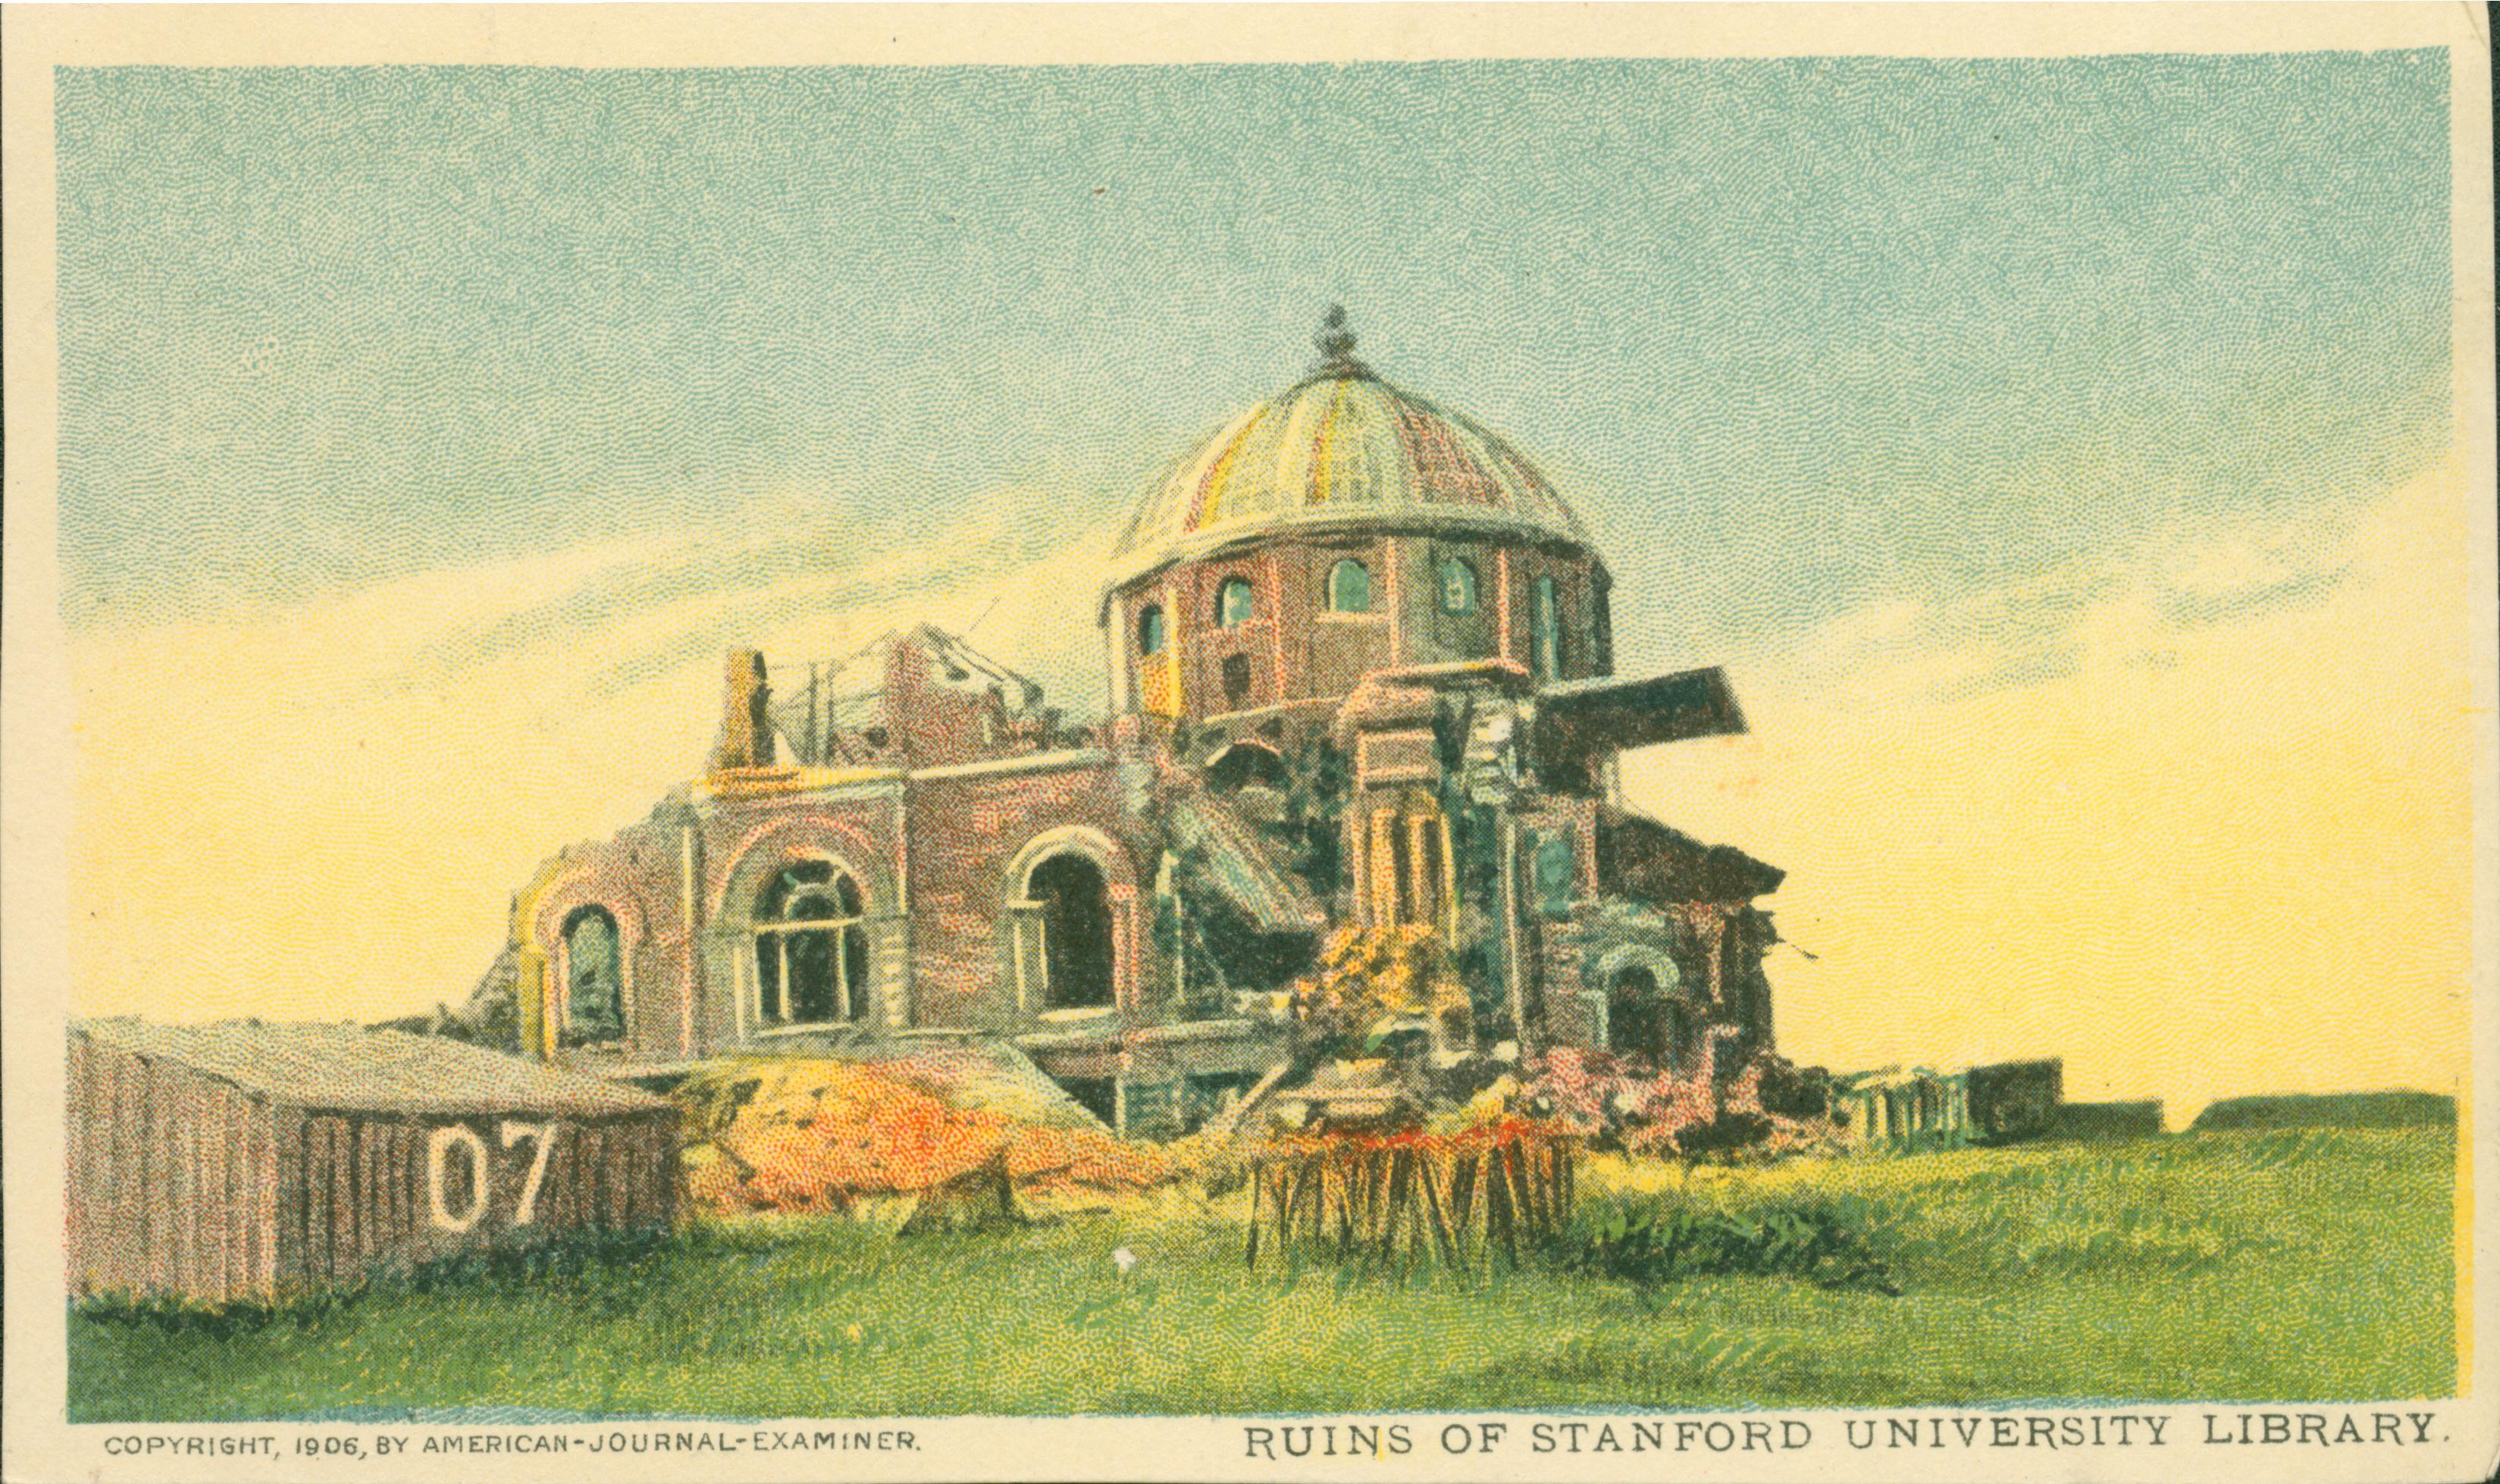 View of the destroyed exterior of the library after the destructive earthquake of 1906, destroyed building surrounded by open field